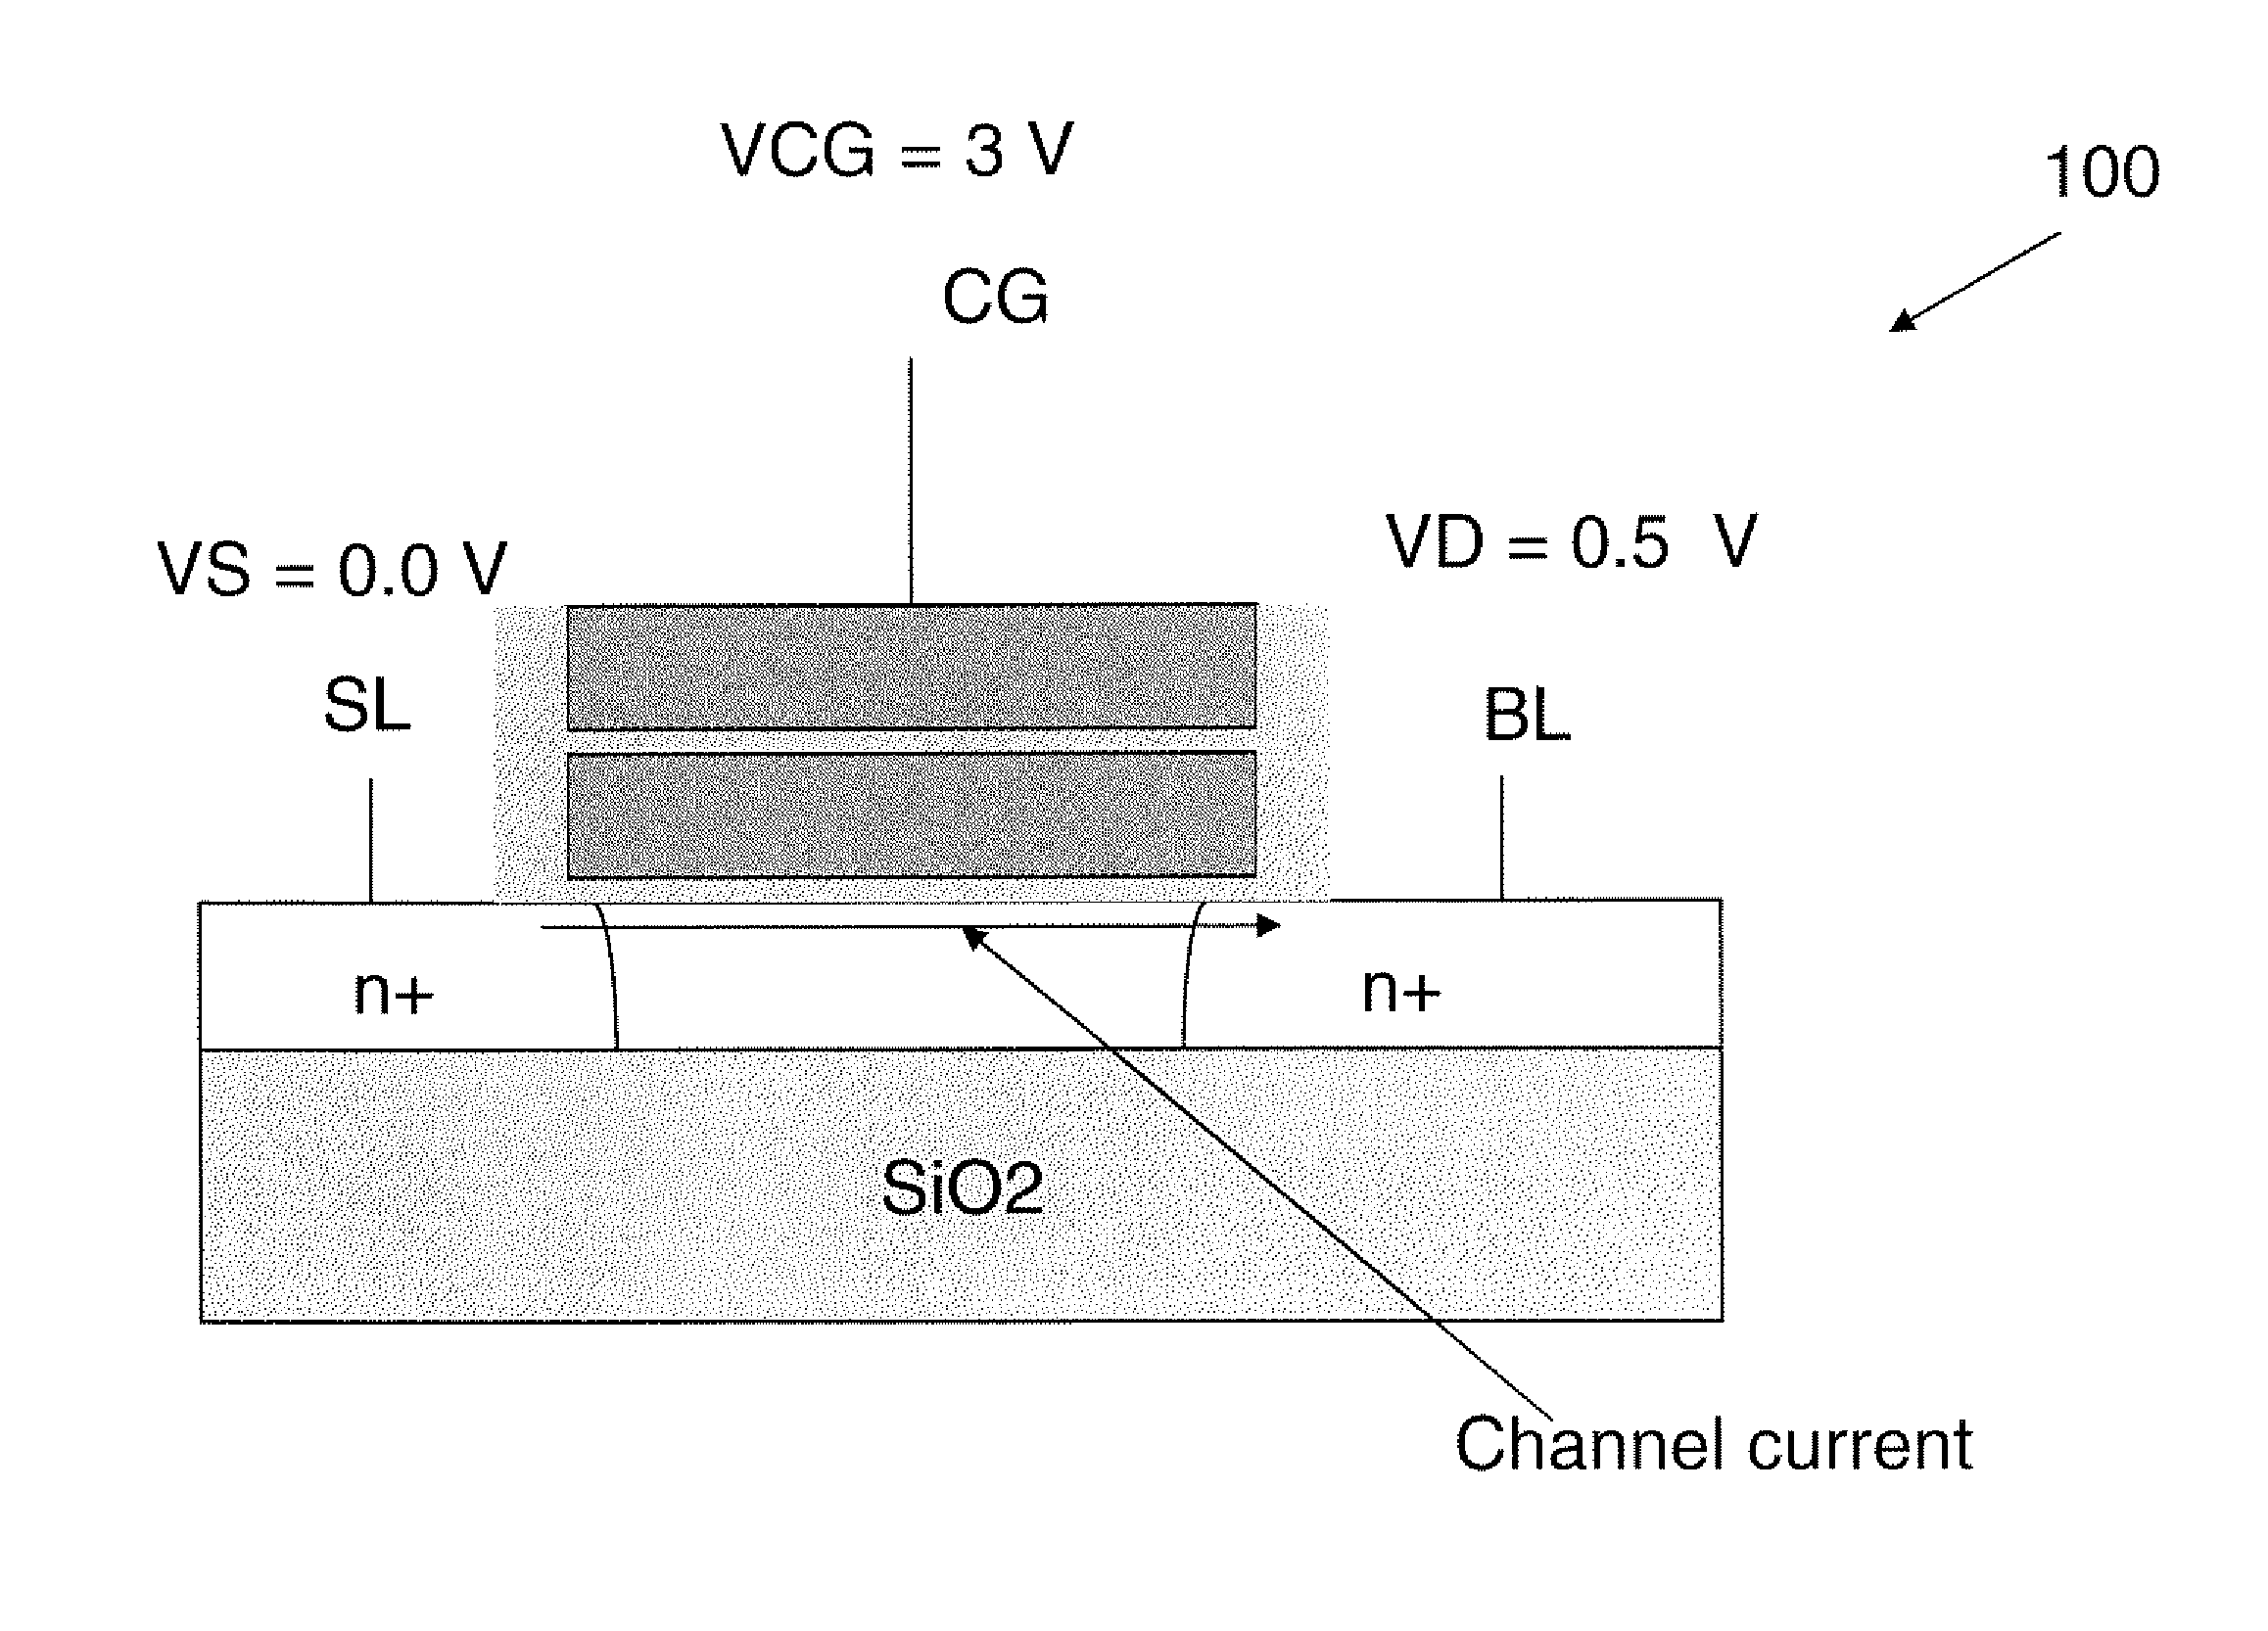 Semiconductor device with floating gate and electrically floating body